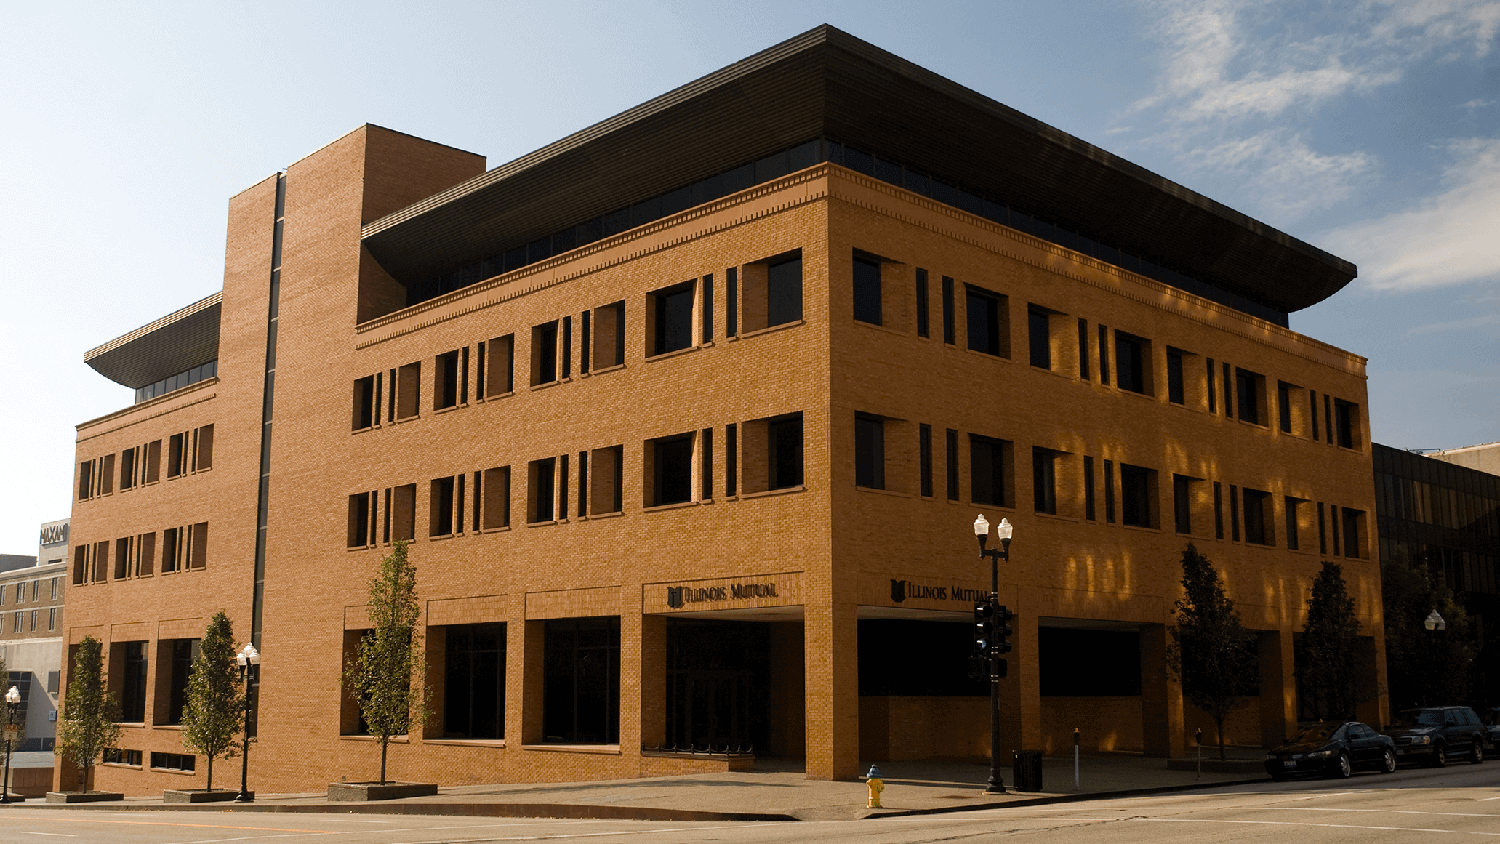 Illinois Mutual home office building exterior